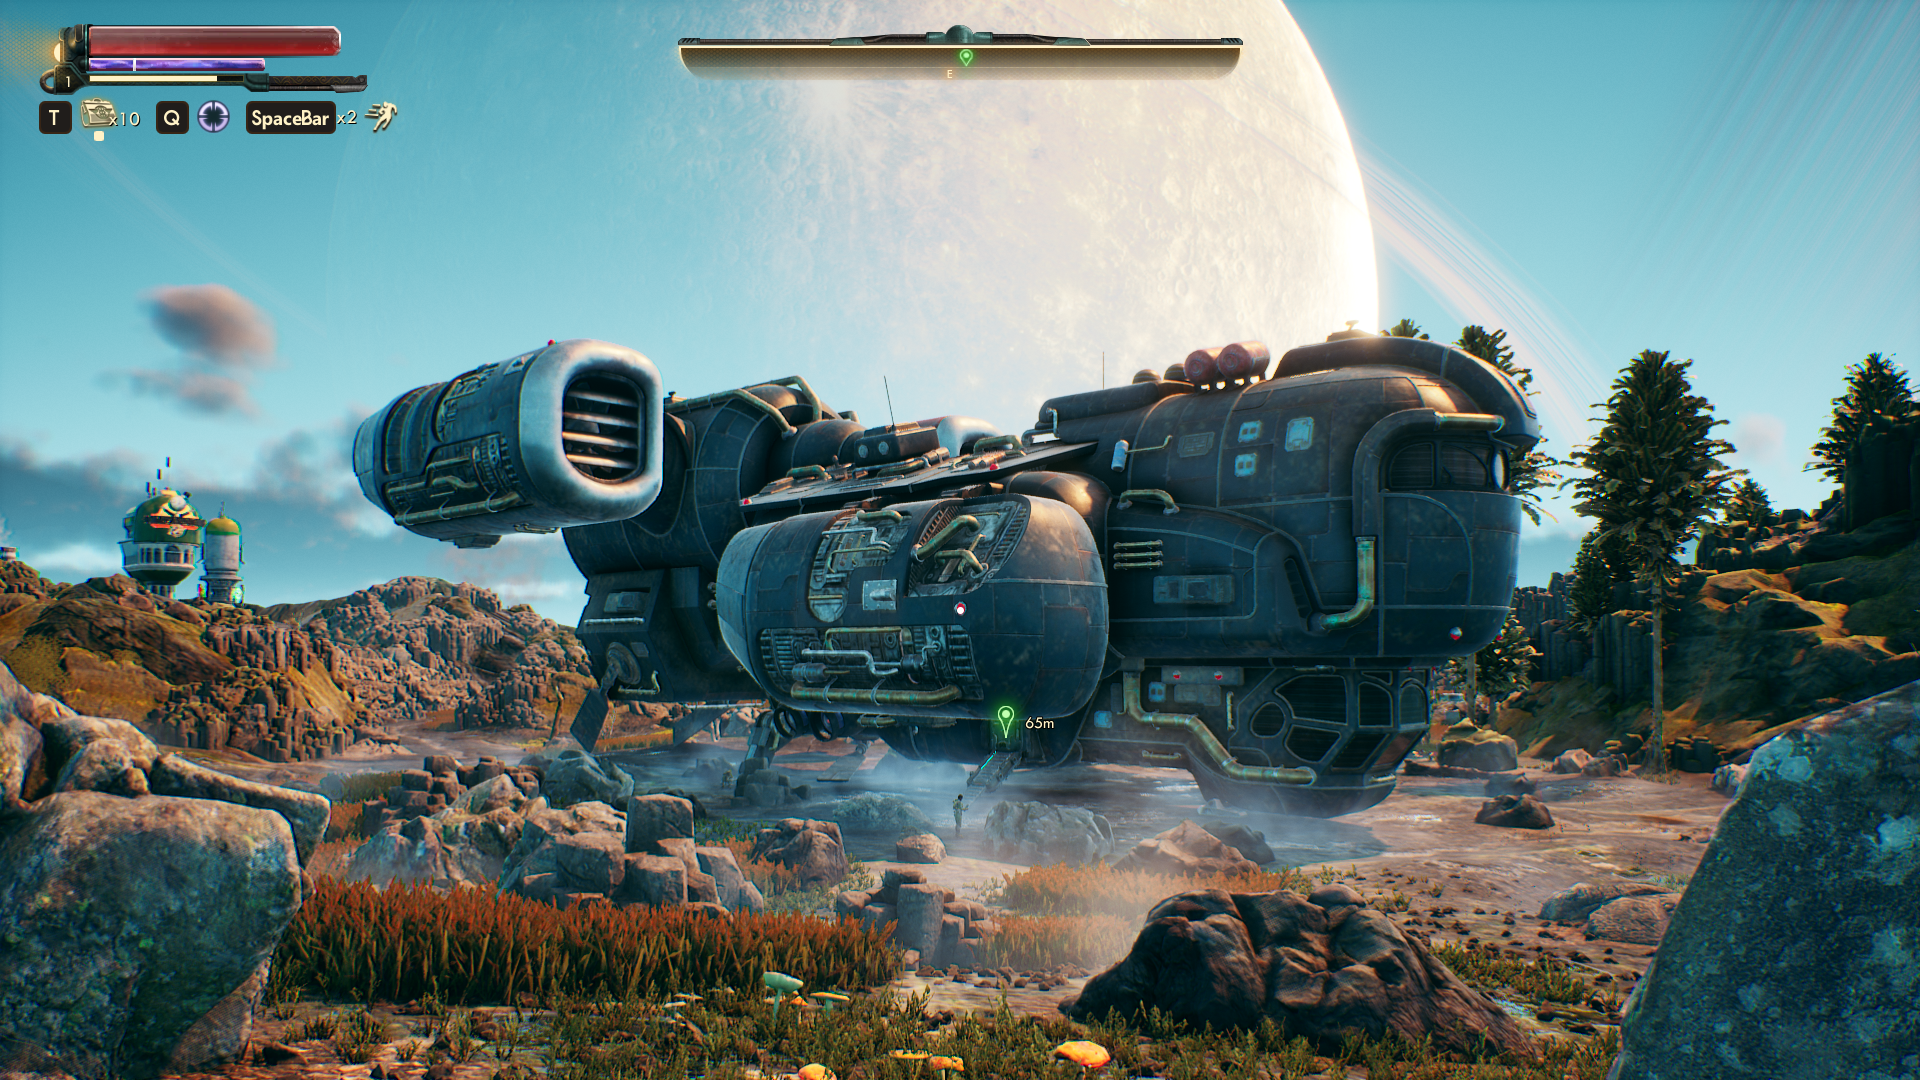 Your spaceship, the Unreliable, sits in a field in The Outer Worlds.